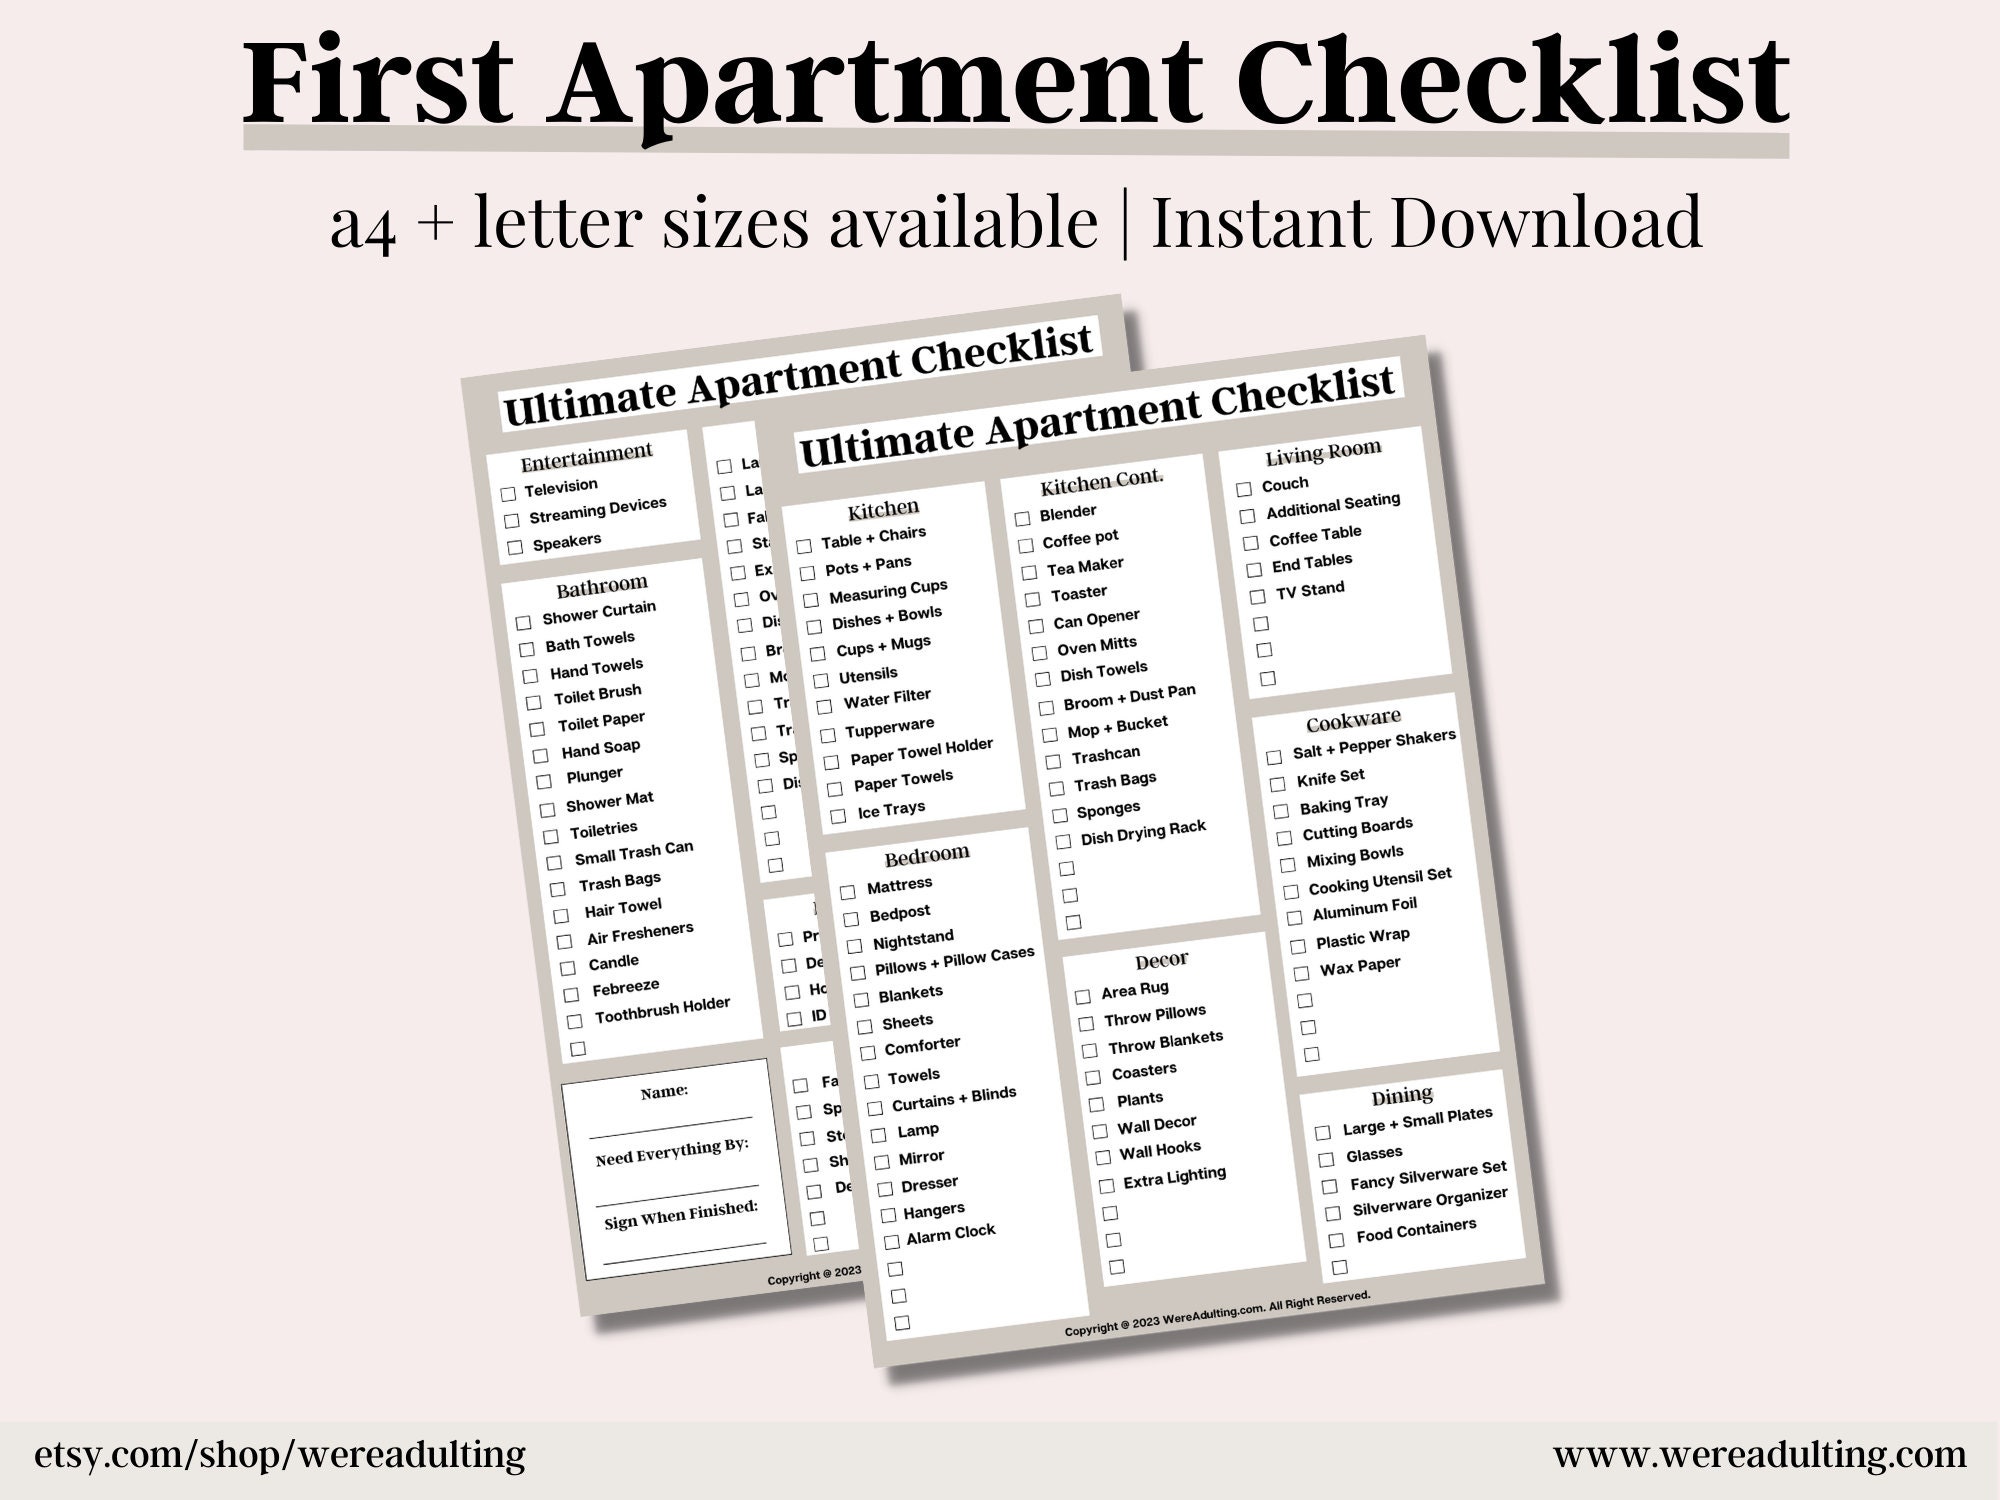 First Apartment Checklist - The Ultimate First Apartment Checklist, Apartment c